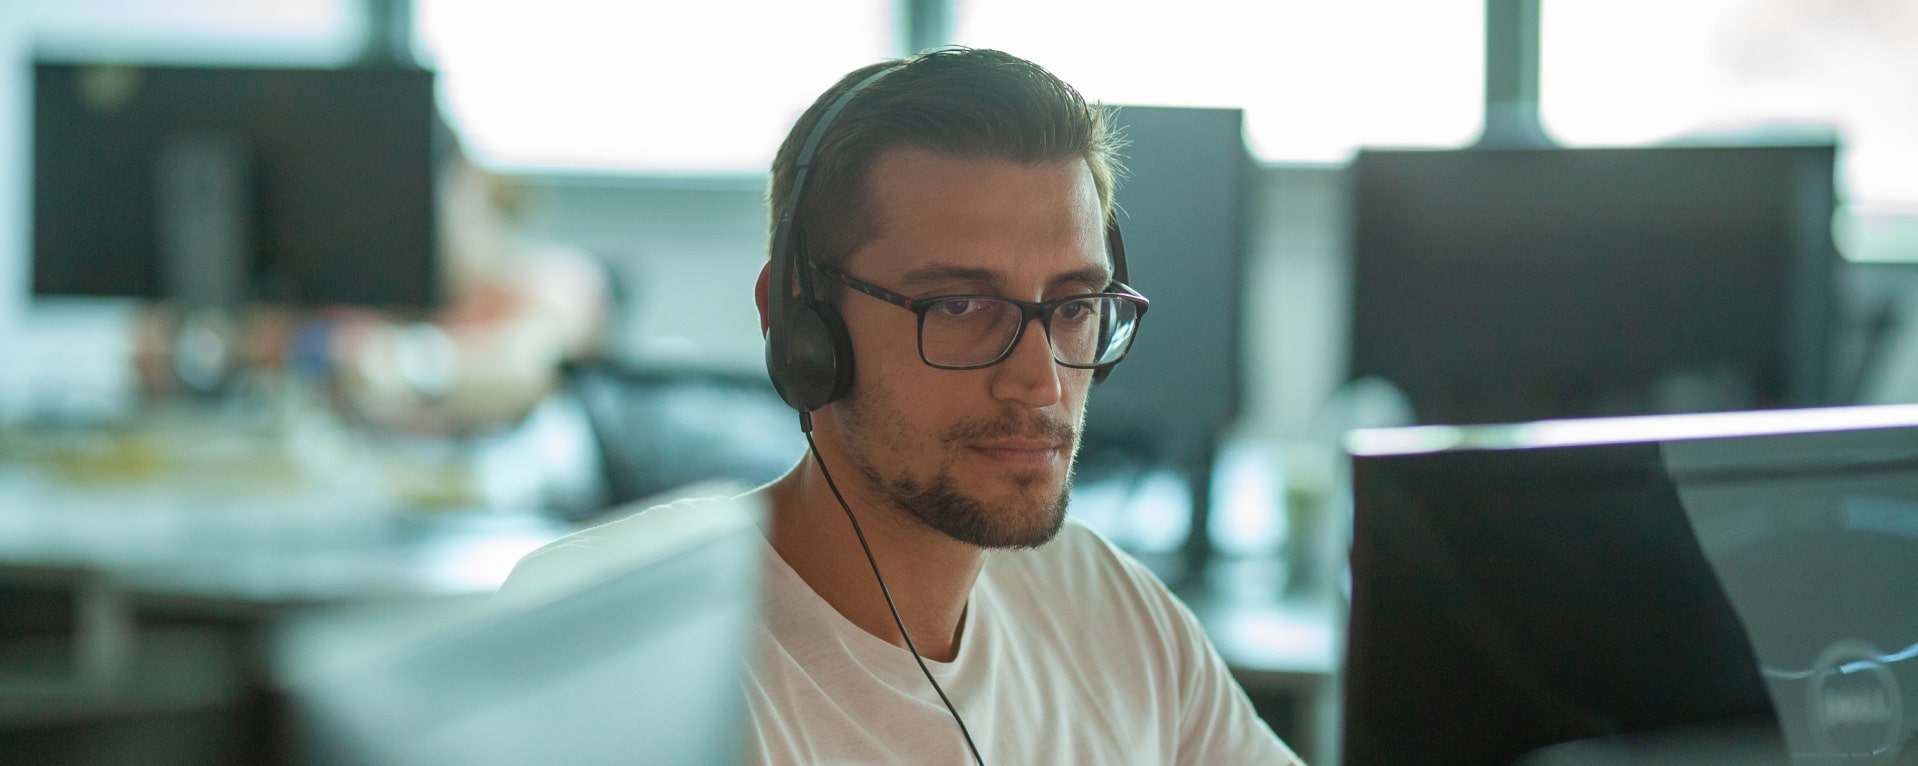 A man with headphones working on the computer